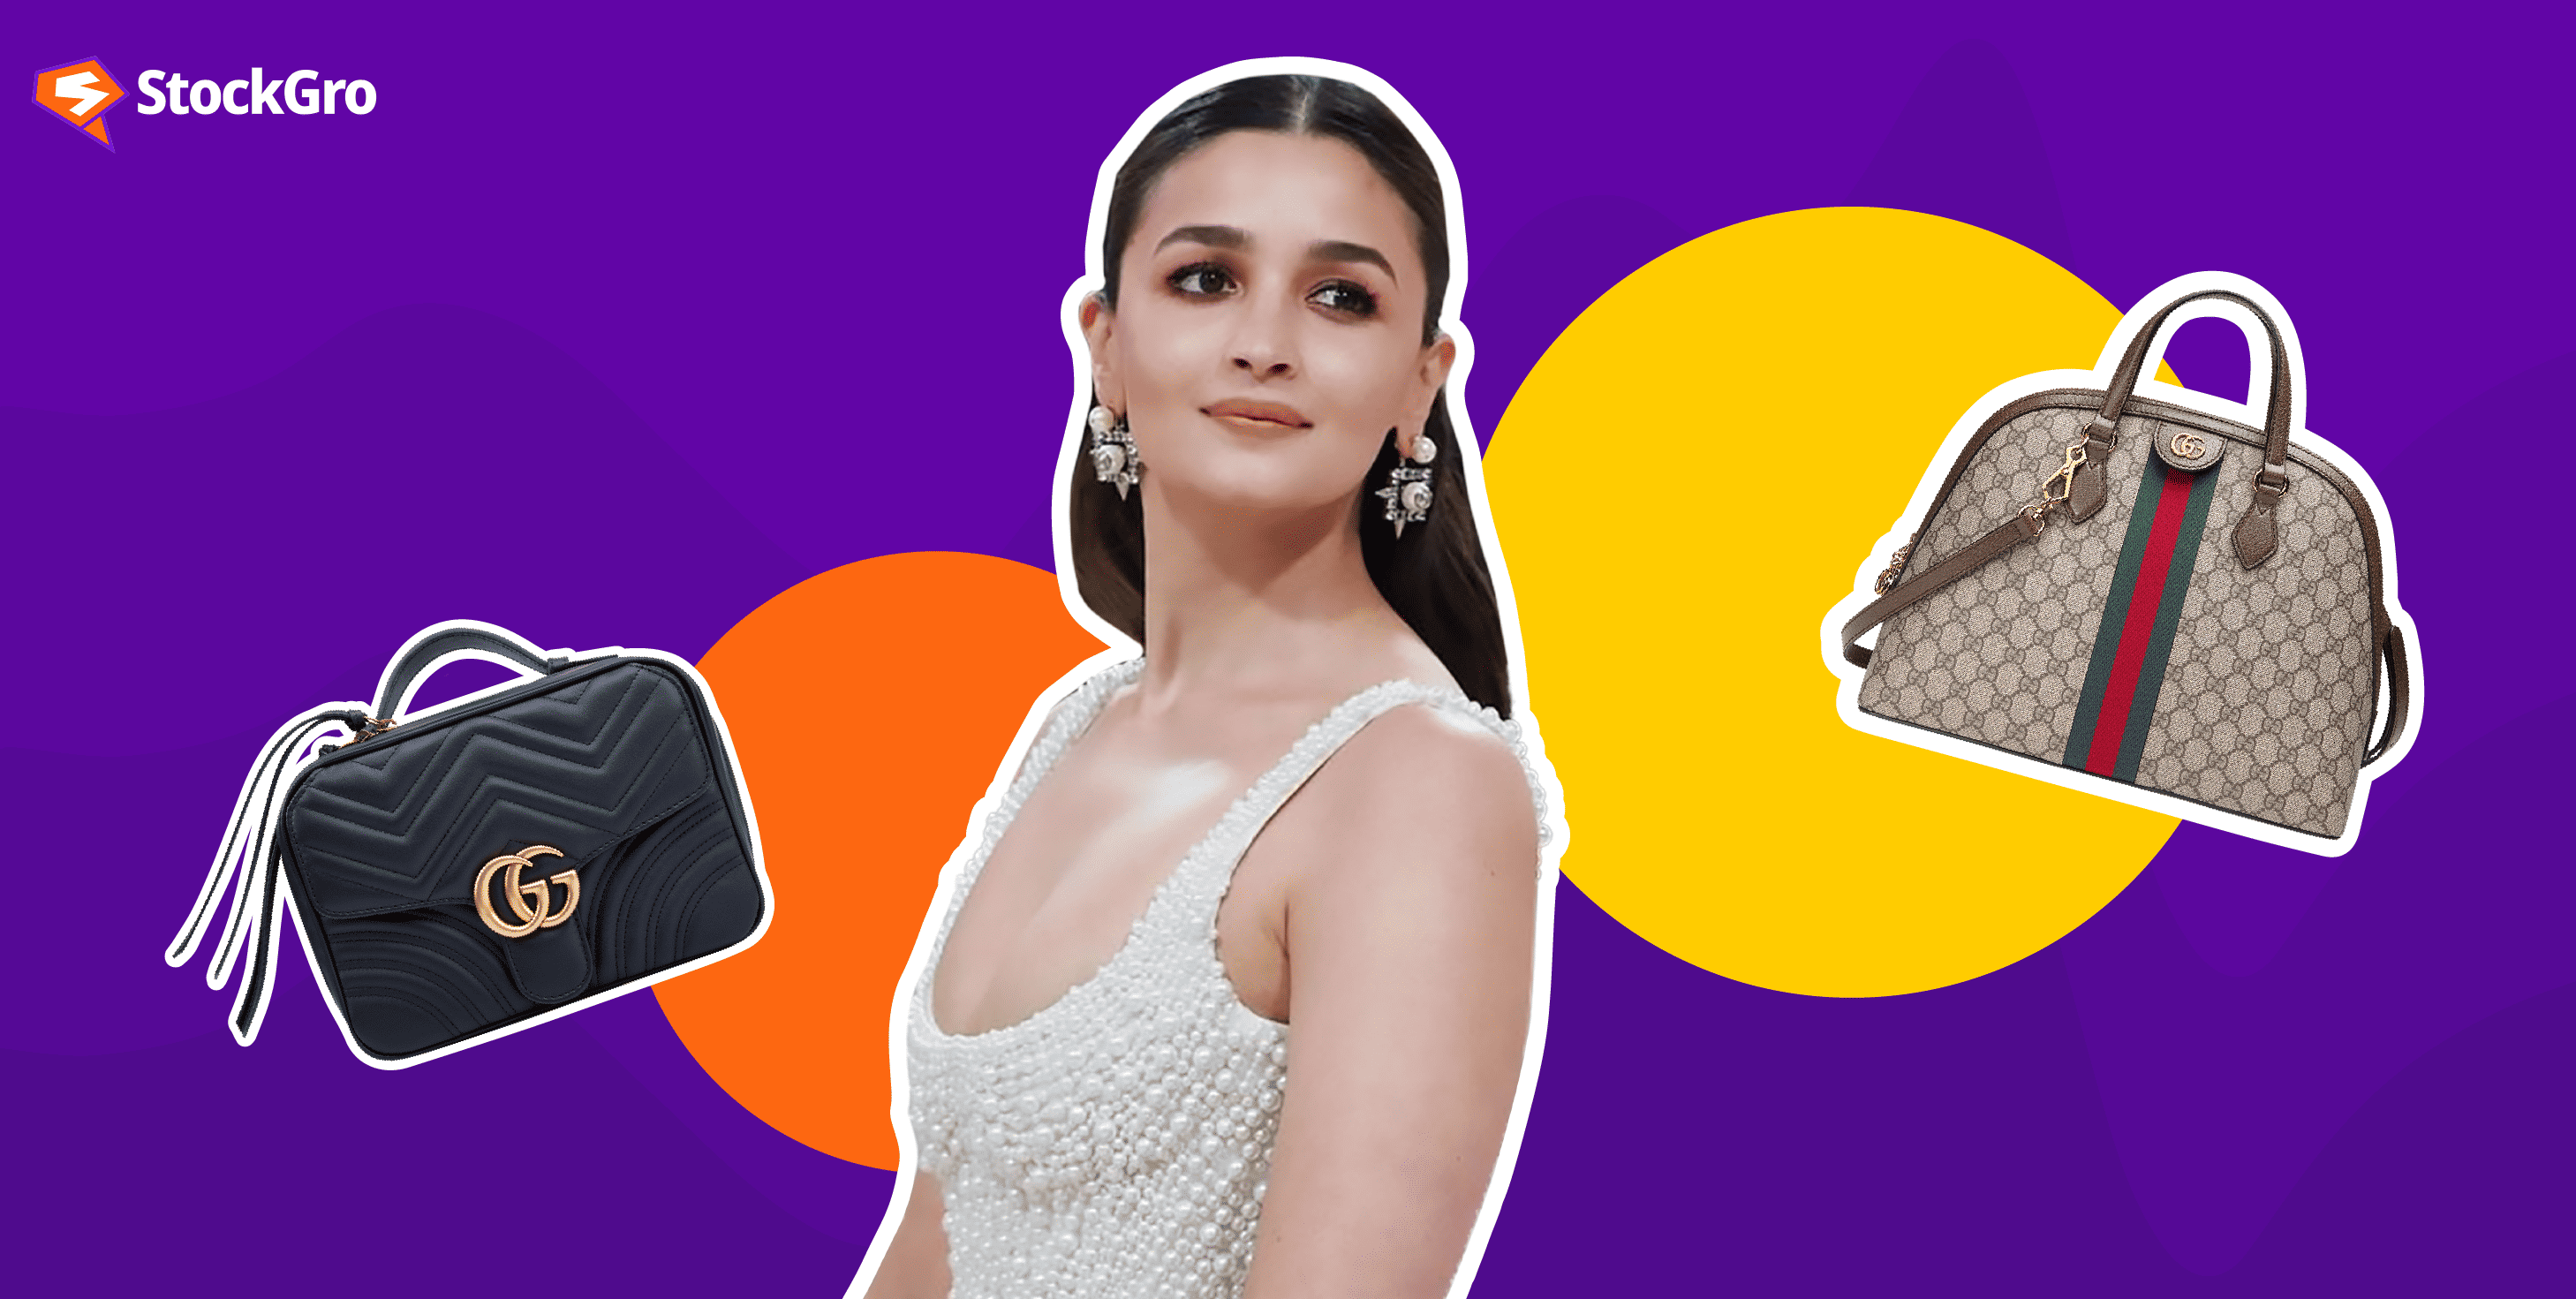 Alia Bhatt is the first Indian global ambassador for Gucci